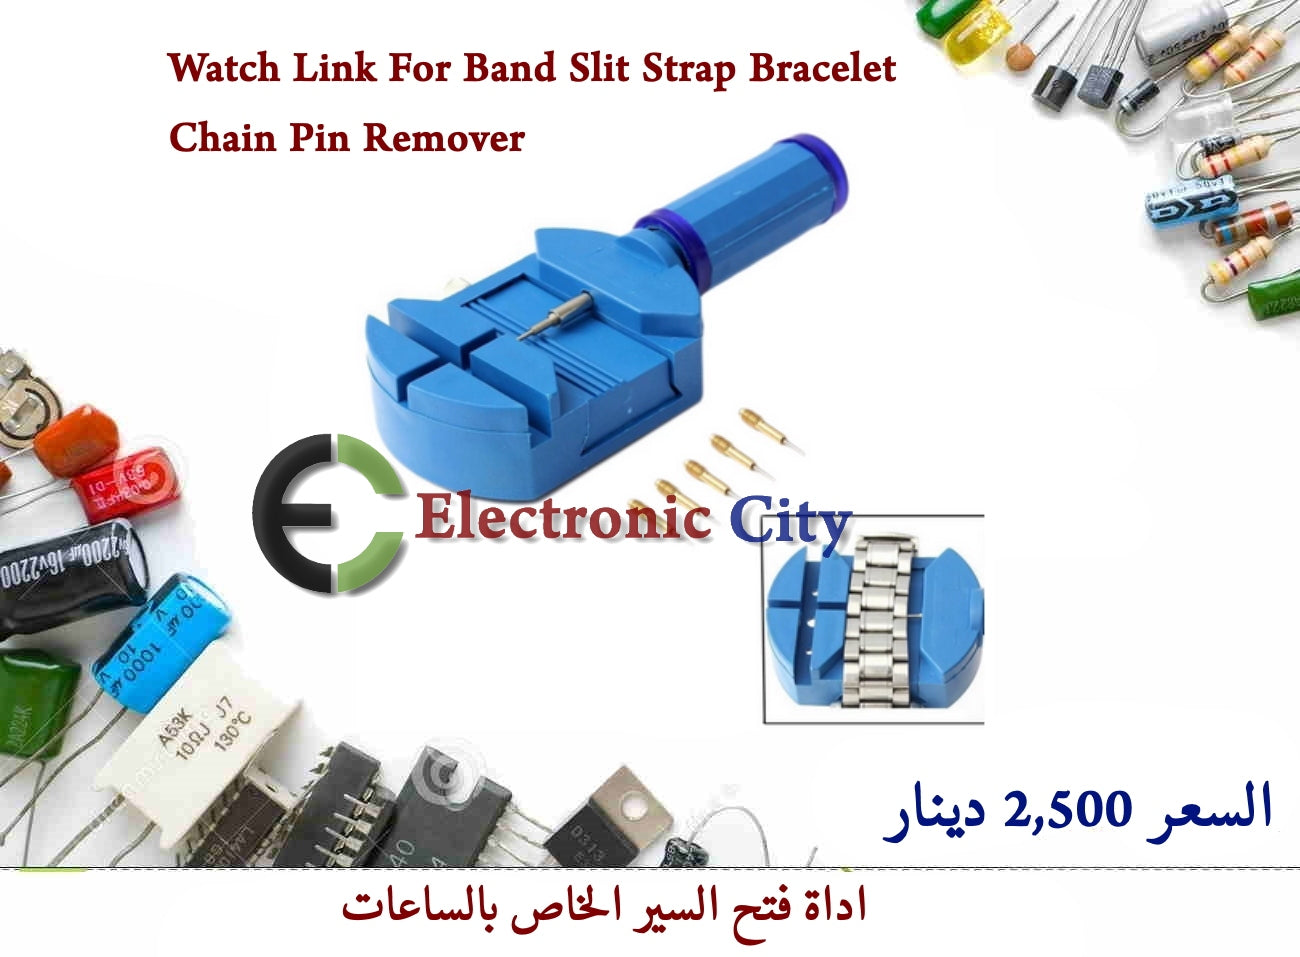 Watch Link For Band Slit Strap Bracelet Chain Pin Remover